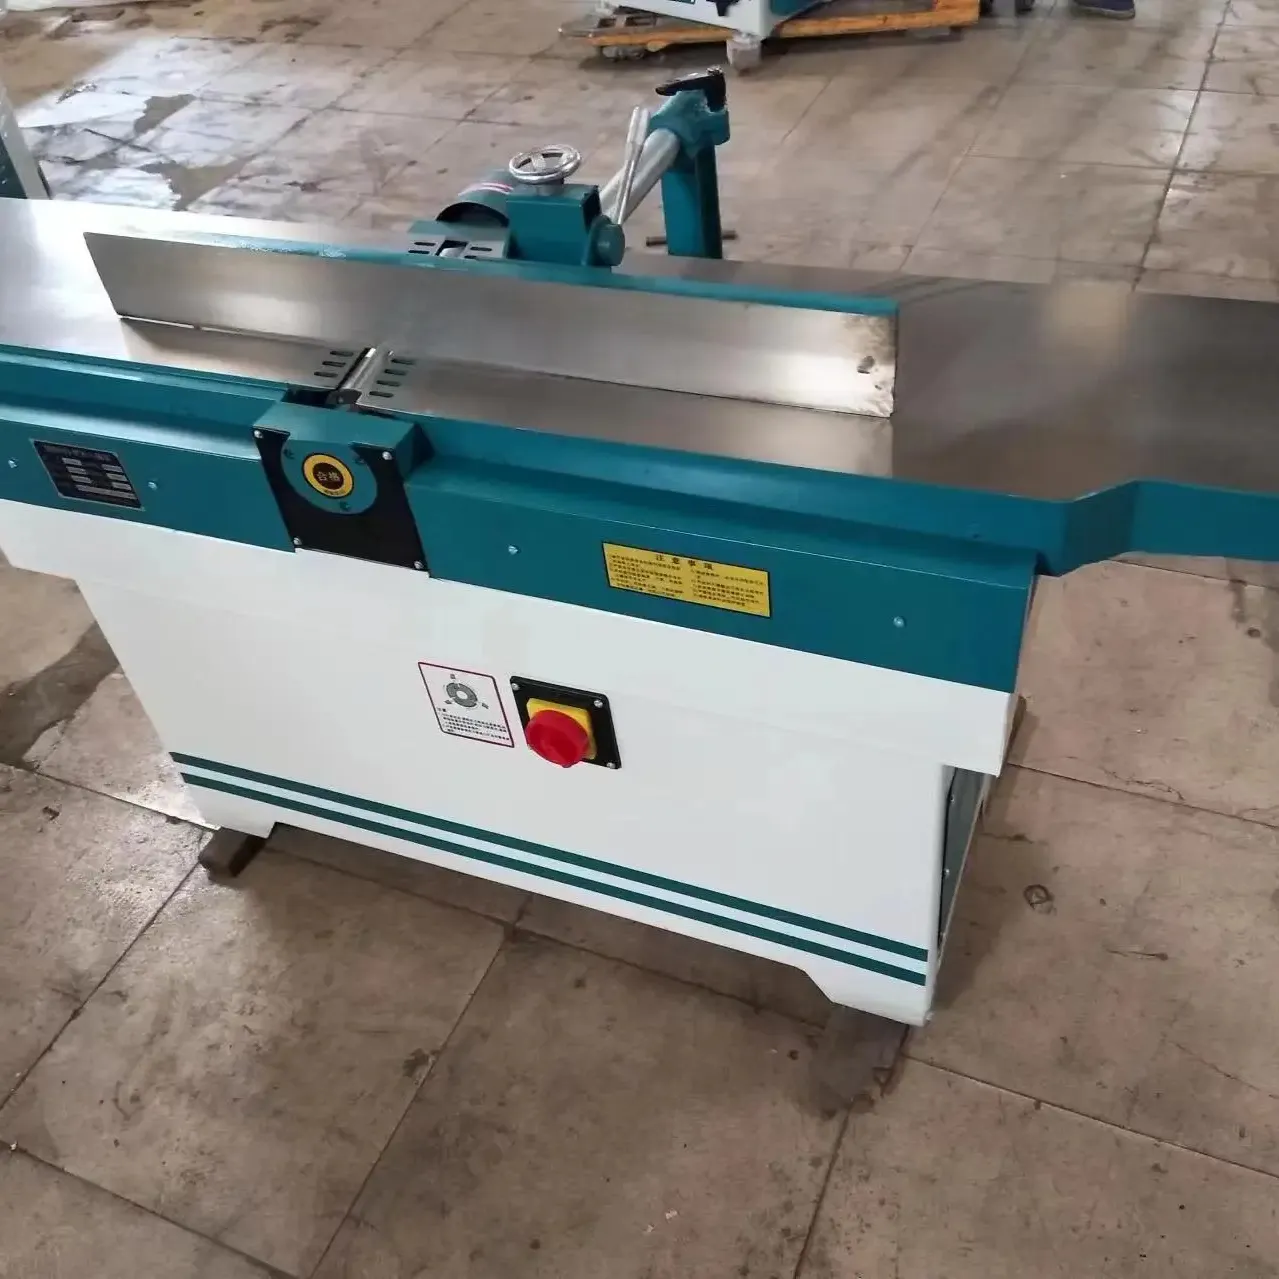 Distributor Price Woodworking Machinery Wood Jointer Planer Surface Planer Machine Finger Jointer Woodworking Machine Price